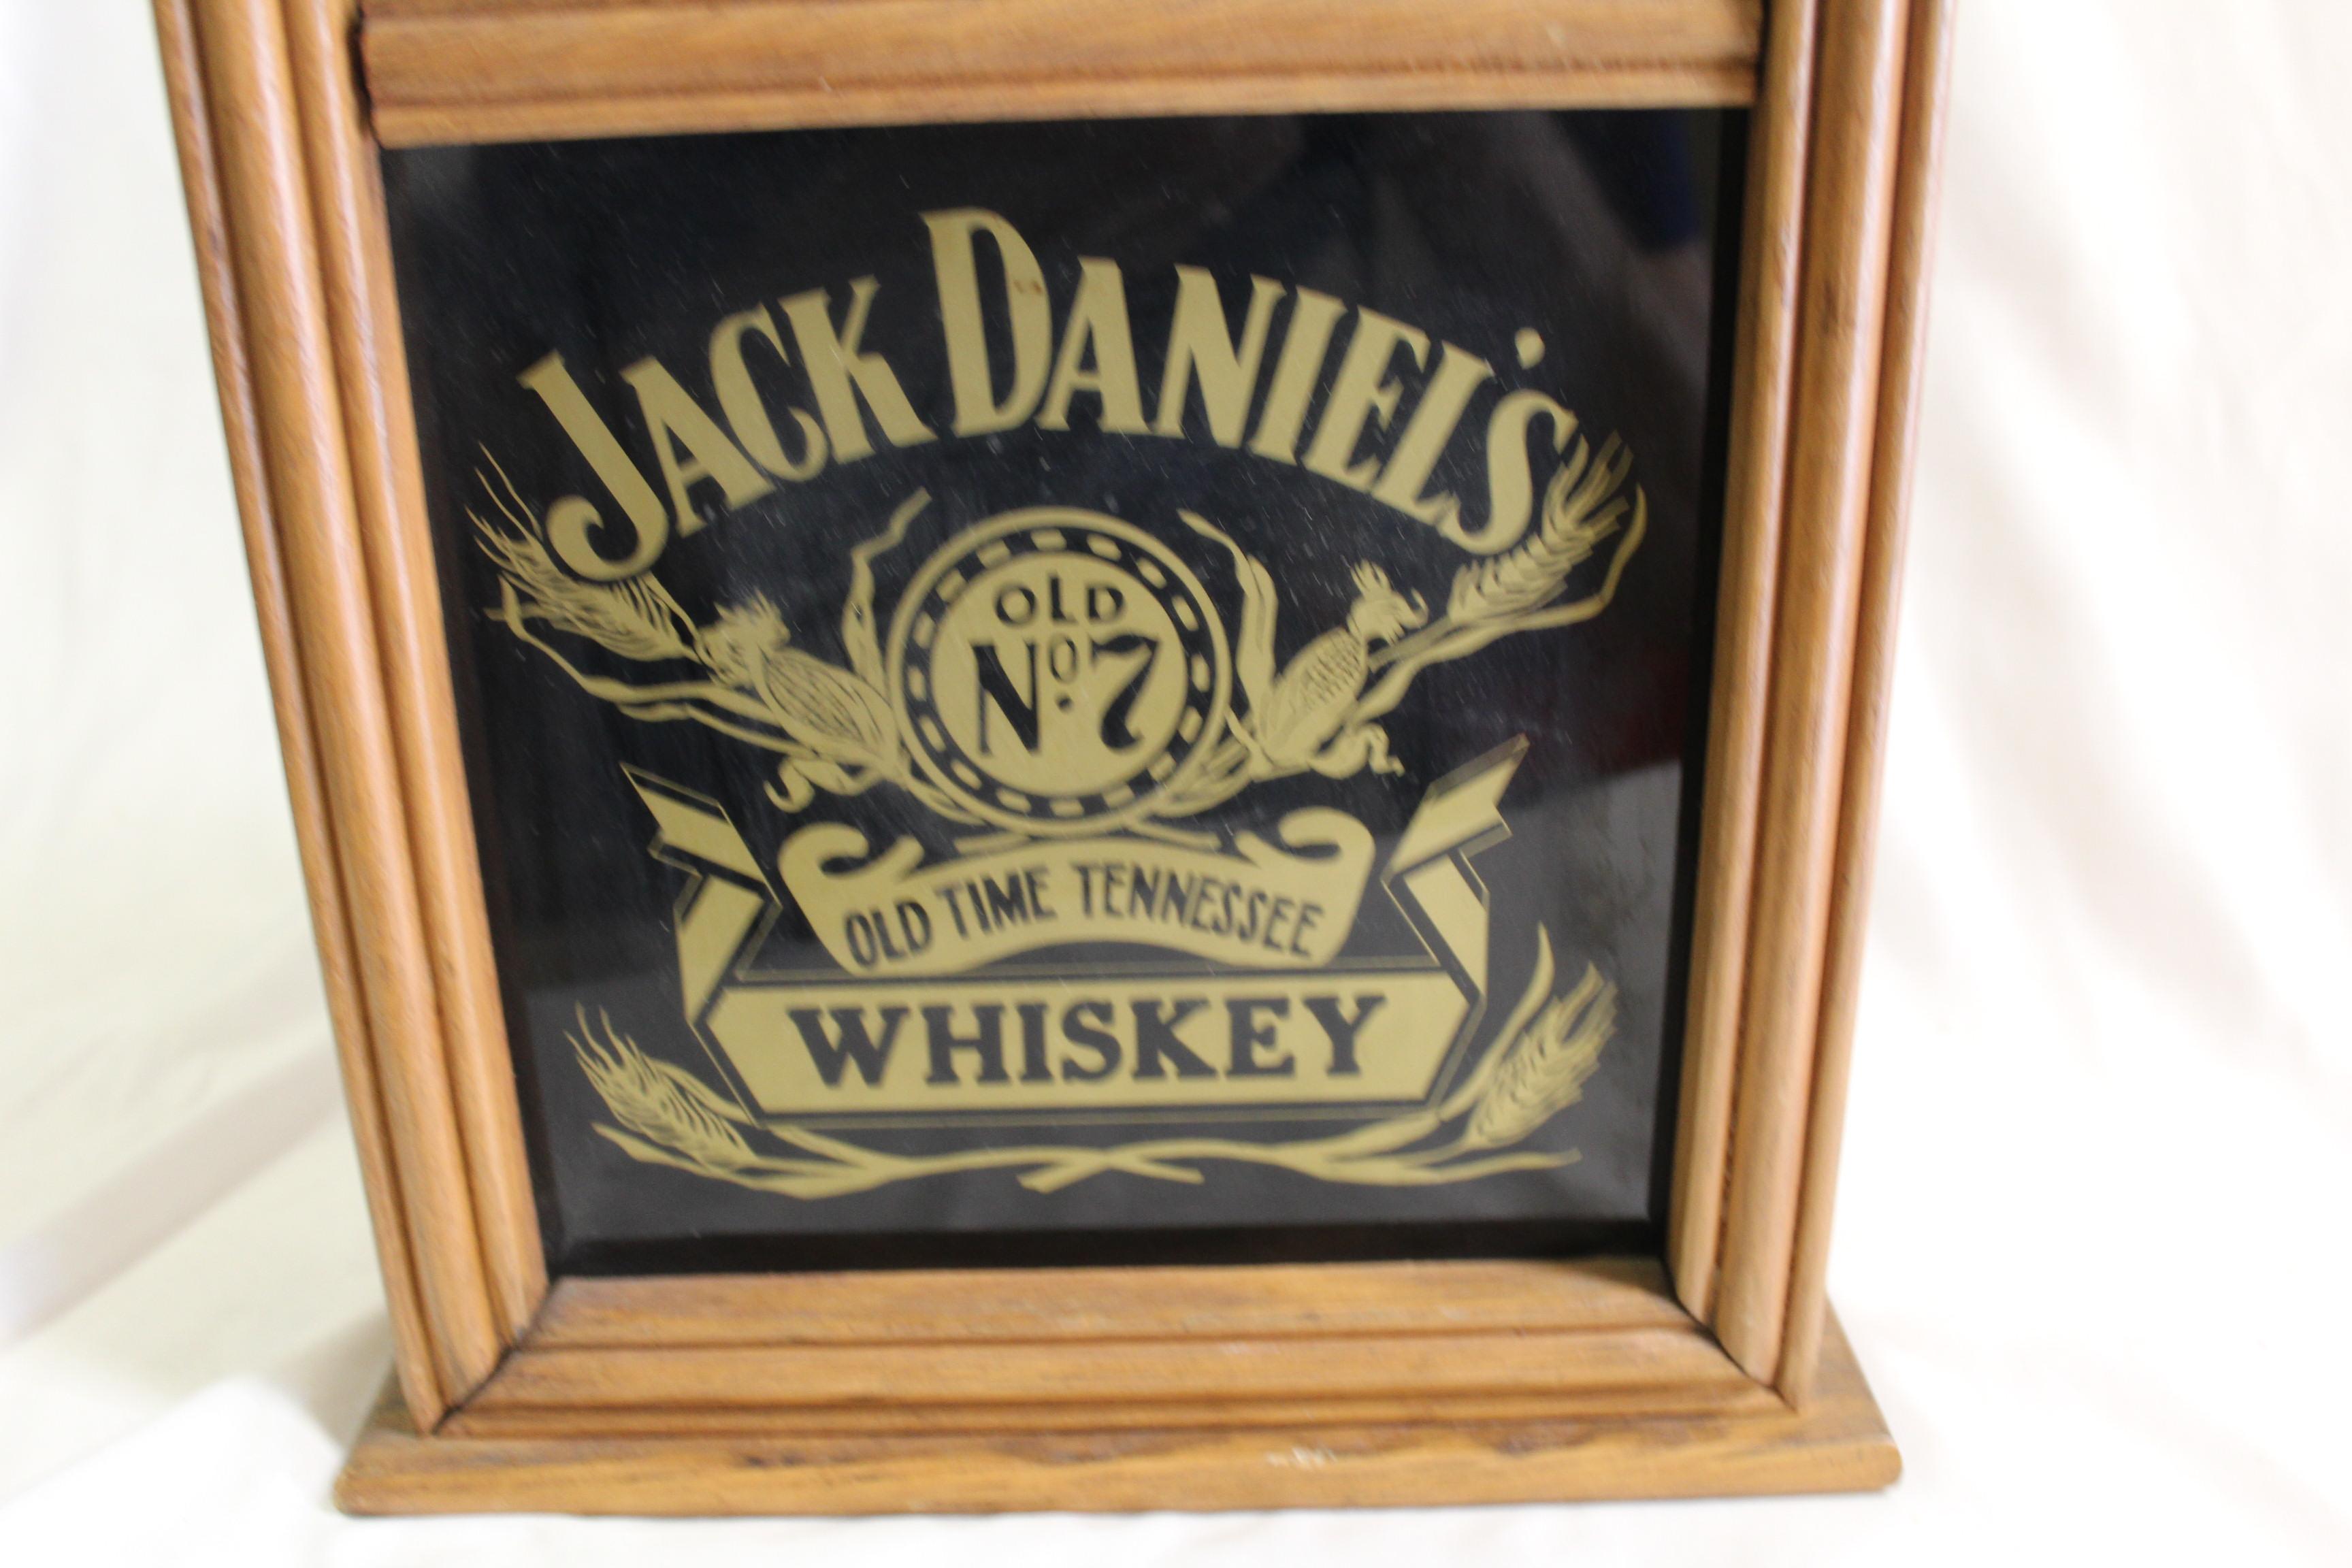 A good looking Clock for any Jack Daniels Collector. Look good on a bar top or on the wall. Most likely Salesman gift ! Good size. In excellent condition, has been in a private collection.